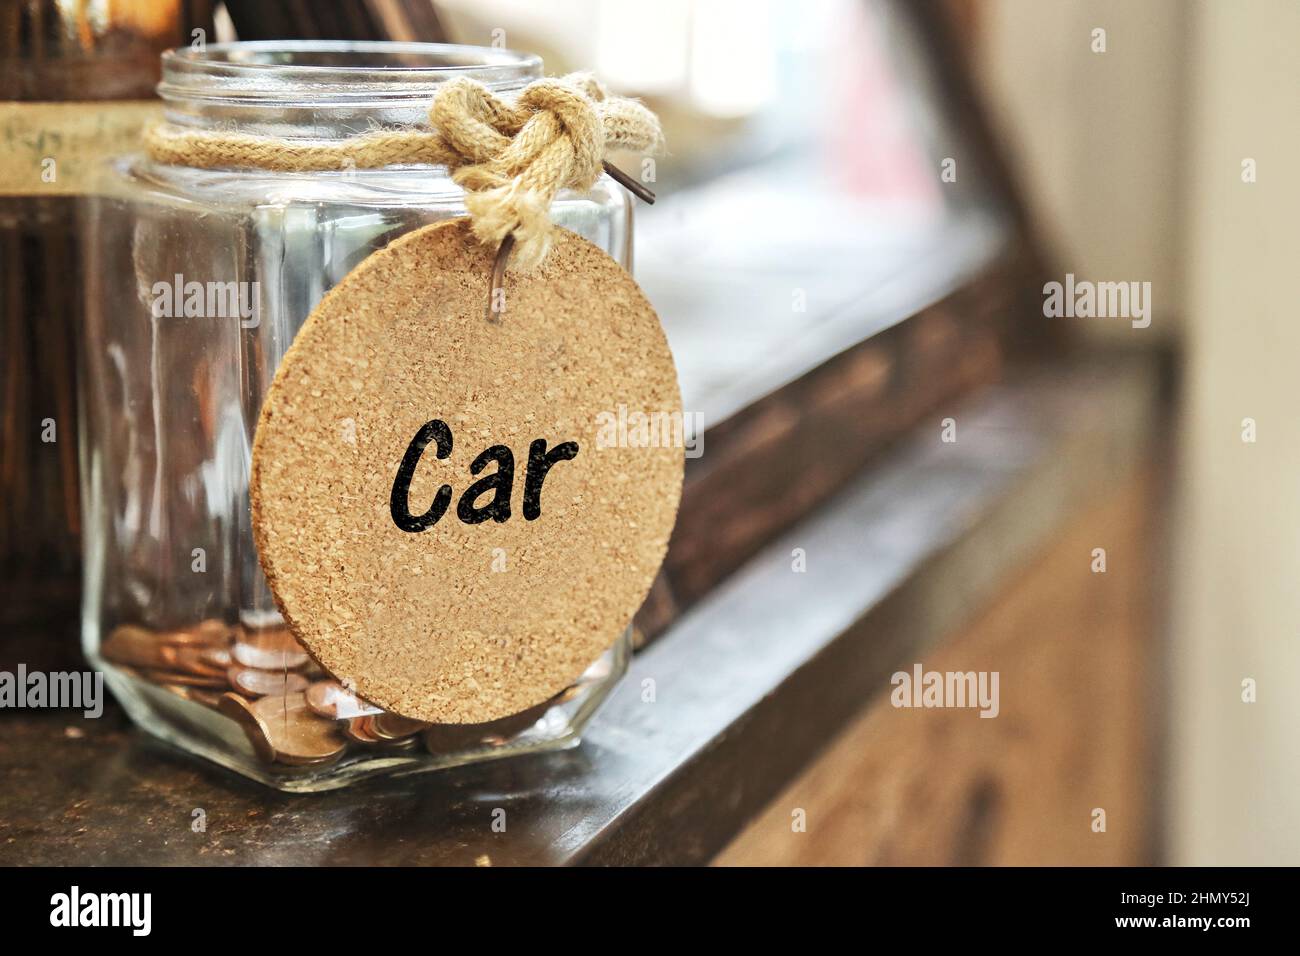 Saving money for buy car. Vintage retro glass jar with hemp rope tie Car tag and few coins inside on wood counter. spending on down payment interest. Stock Photo